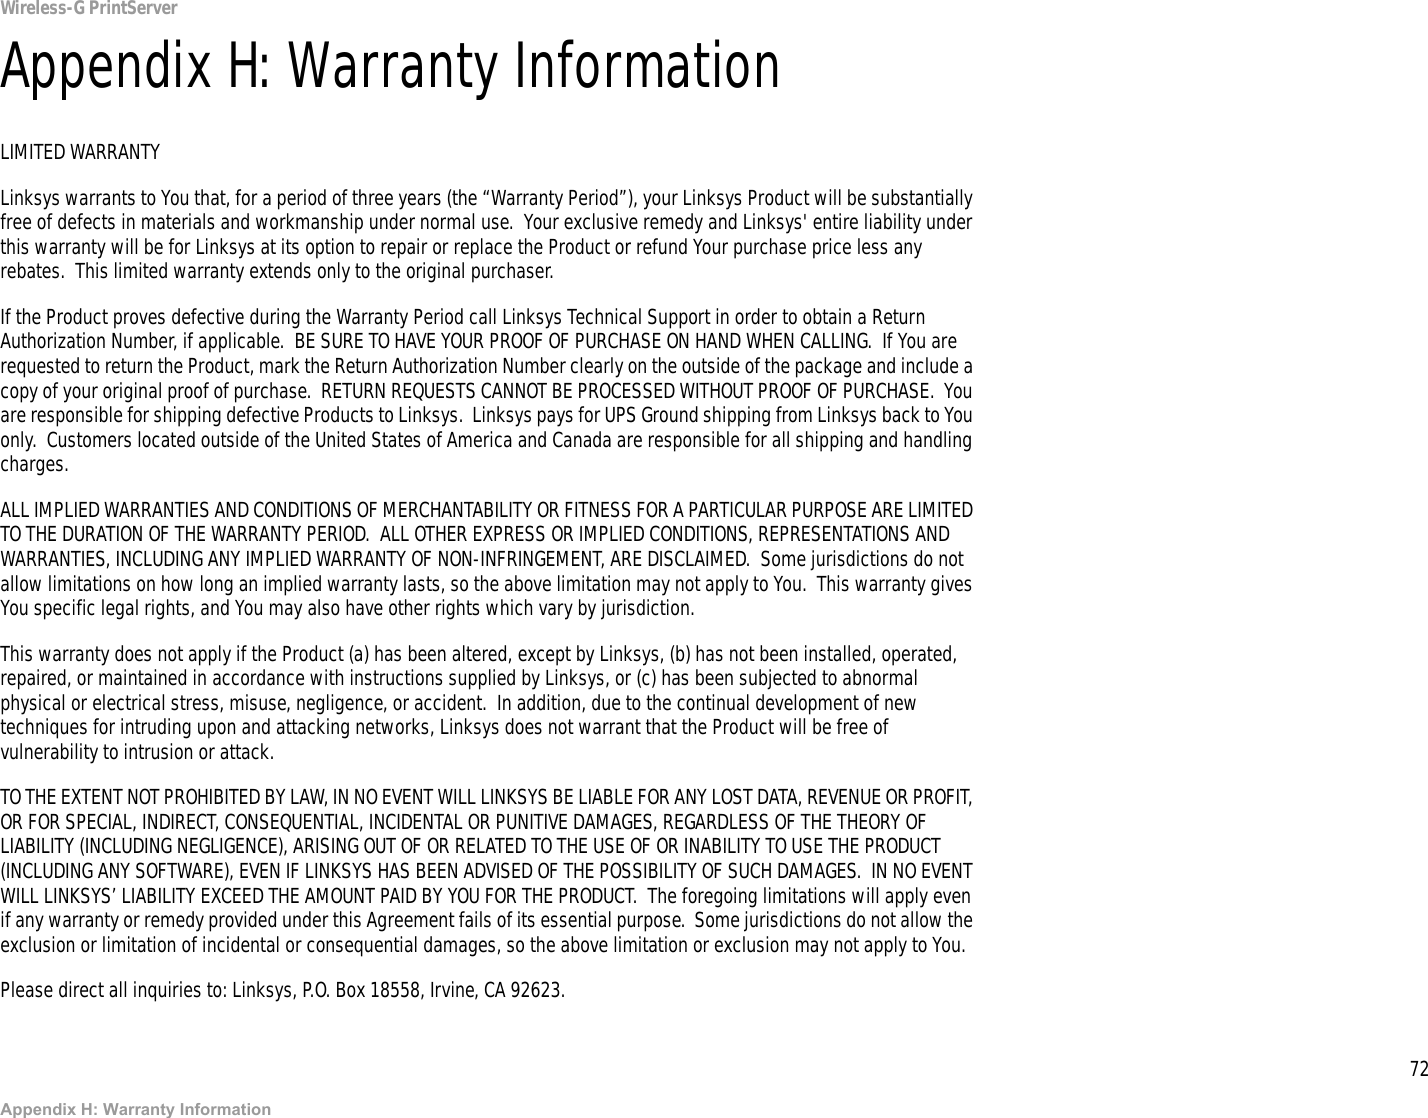 72Appendix H: Warranty InformationWireless-G PrintServerAppendix H: Warranty InformationLIMITED WARRANTYLinksys warrants to You that, for a period of three years (the “Warranty Period”), your Linksys Product will be substantially free of defects in materials and workmanship under normal use.  Your exclusive remedy and Linksys&apos; entire liability under this warranty will be for Linksys at its option to repair or replace the Product or refund Your purchase price less any rebates.  This limited warranty extends only to the original purchaser.  If the Product proves defective during the Warranty Period call Linksys Technical Support in order to obtain a Return Authorization Number, if applicable.  BE SURE TO HAVE YOUR PROOF OF PURCHASE ON HAND WHEN CALLING.  If You are requested to return the Product, mark the Return Authorization Number clearly on the outside of the package and include a copy of your original proof of purchase.  RETURN REQUESTS CANNOT BE PROCESSED WITHOUT PROOF OF PURCHASE.  You are responsible for shipping defective Products to Linksys.  Linksys pays for UPS Ground shipping from Linksys back to You only.  Customers located outside of the United States of America and Canada are responsible for all shipping and handling charges. ALL IMPLIED WARRANTIES AND CONDITIONS OF MERCHANTABILITY OR FITNESS FOR A PARTICULAR PURPOSE ARE LIMITED TO THE DURATION OF THE WARRANTY PERIOD.  ALL OTHER EXPRESS OR IMPLIED CONDITIONS, REPRESENTATIONS AND WARRANTIES, INCLUDING ANY IMPLIED WARRANTY OF NON-INFRINGEMENT, ARE DISCLAIMED.  Some jurisdictions do not allow limitations on how long an implied warranty lasts, so the above limitation may not apply to You.  This warranty gives You specific legal rights, and You may also have other rights which vary by jurisdiction.This warranty does not apply if the Product (a) has been altered, except by Linksys, (b) has not been installed, operated, repaired, or maintained in accordance with instructions supplied by Linksys, or (c) has been subjected to abnormal physical or electrical stress, misuse, negligence, or accident.  In addition, due to the continual development of new techniques for intruding upon and attacking networks, Linksys does not warrant that the Product will be free of vulnerability to intrusion or attack.TO THE EXTENT NOT PROHIBITED BY LAW, IN NO EVENT WILL LINKSYS BE LIABLE FOR ANY LOST DATA, REVENUE OR PROFIT, OR FOR SPECIAL, INDIRECT, CONSEQUENTIAL, INCIDENTAL OR PUNITIVE DAMAGES, REGARDLESS OF THE THEORY OF LIABILITY (INCLUDING NEGLIGENCE), ARISING OUT OF OR RELATED TO THE USE OF OR INABILITY TO USE THE PRODUCT (INCLUDING ANY SOFTWARE), EVEN IF LINKSYS HAS BEEN ADVISED OF THE POSSIBILITY OF SUCH DAMAGES.  IN NO EVENT WILL LINKSYS’ LIABILITY EXCEED THE AMOUNT PAID BY YOU FOR THE PRODUCT.  The foregoing limitations will apply even if any warranty or remedy provided under this Agreement fails of its essential purpose.  Some jurisdictions do not allow the exclusion or limitation of incidental or consequential damages, so the above limitation or exclusion may not apply to You.Please direct all inquiries to: Linksys, P.O. Box 18558, Irvine, CA 92623.